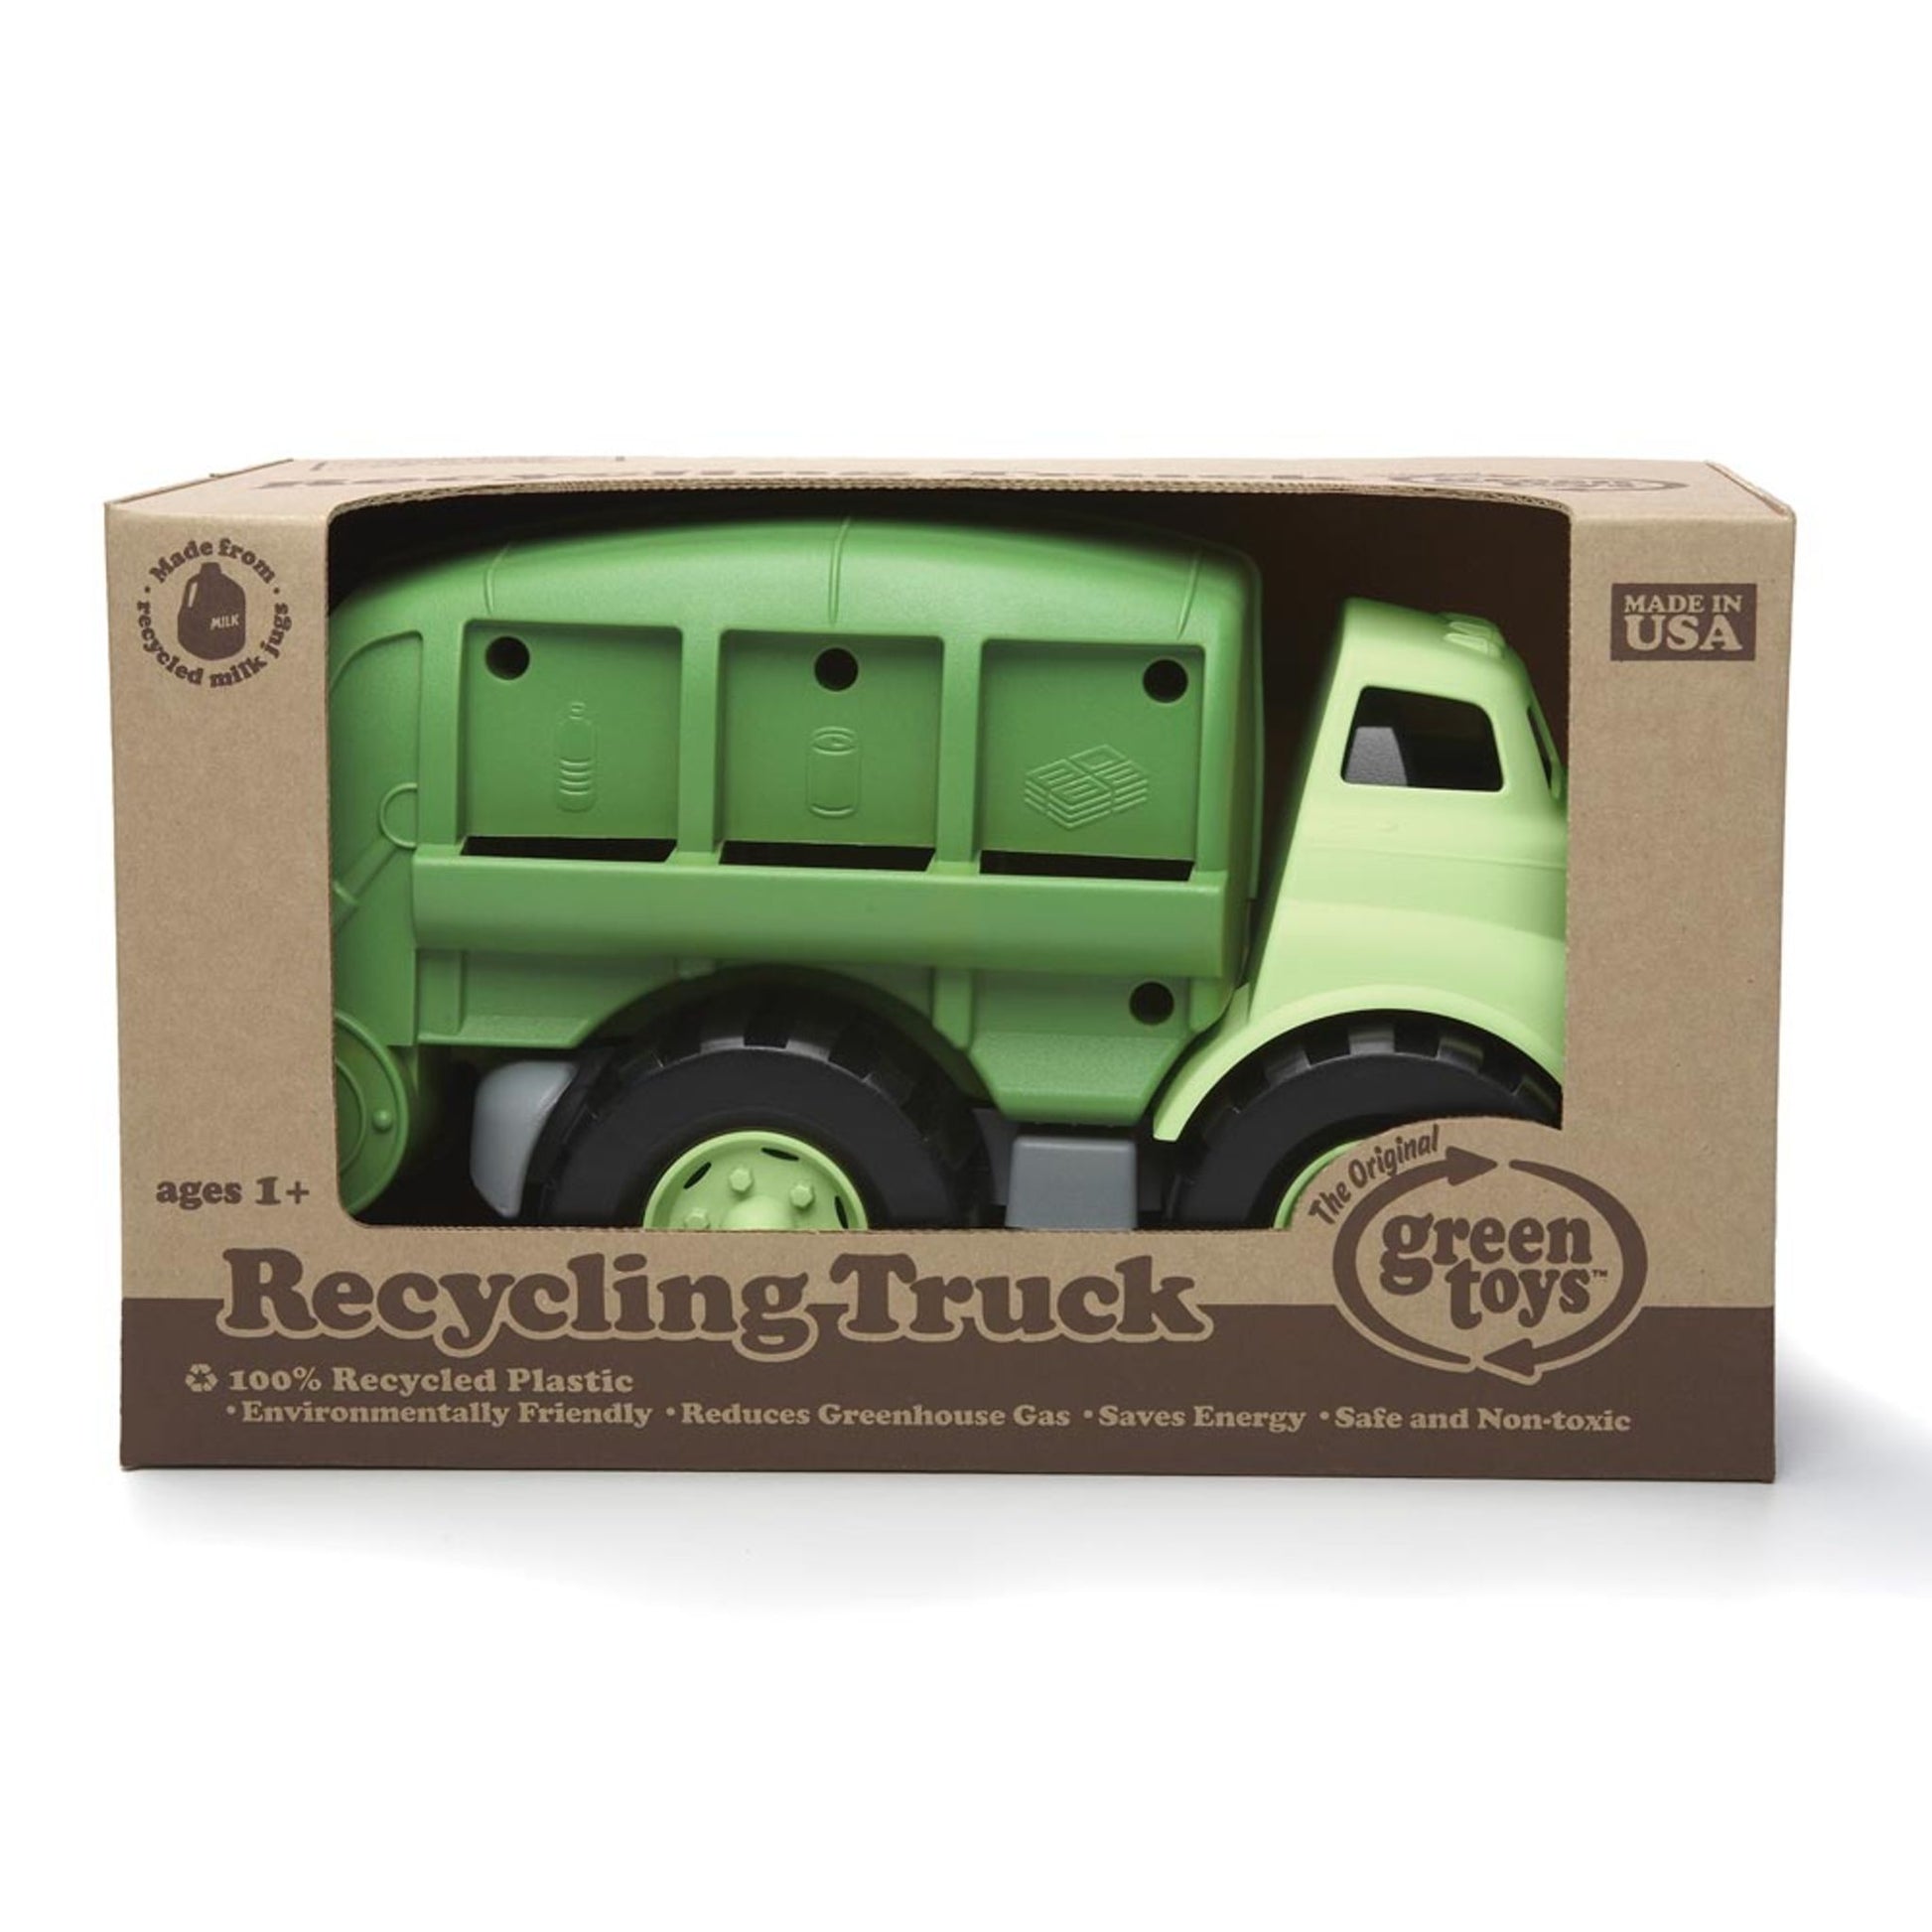 Green Toys toy recycling truck in eco packaging